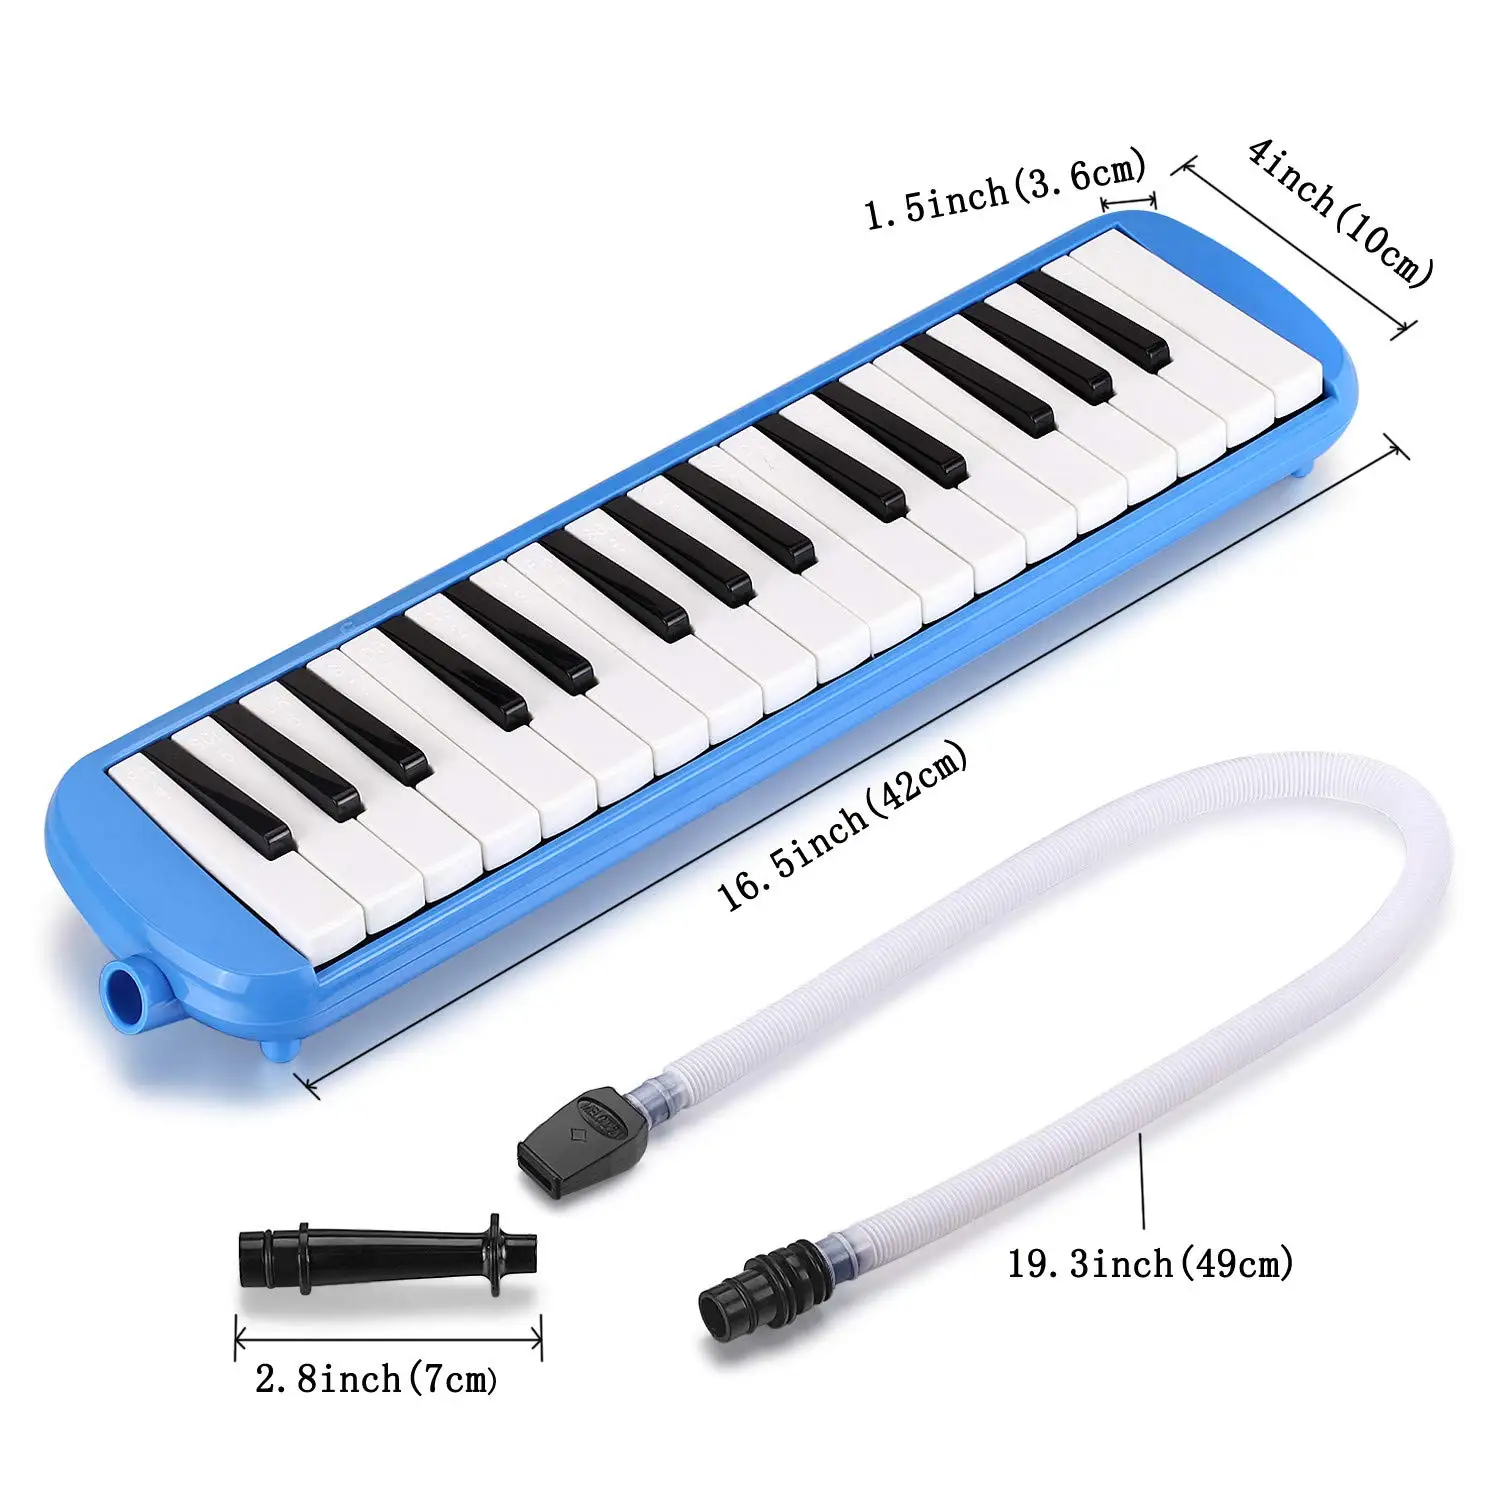 Green Piano Style Melodica Keyboard Musical Education Instrument For Music Lovers Beginners And Children With Mouthpiece & Hose & Bag Kuyal 32 Key Melodica 